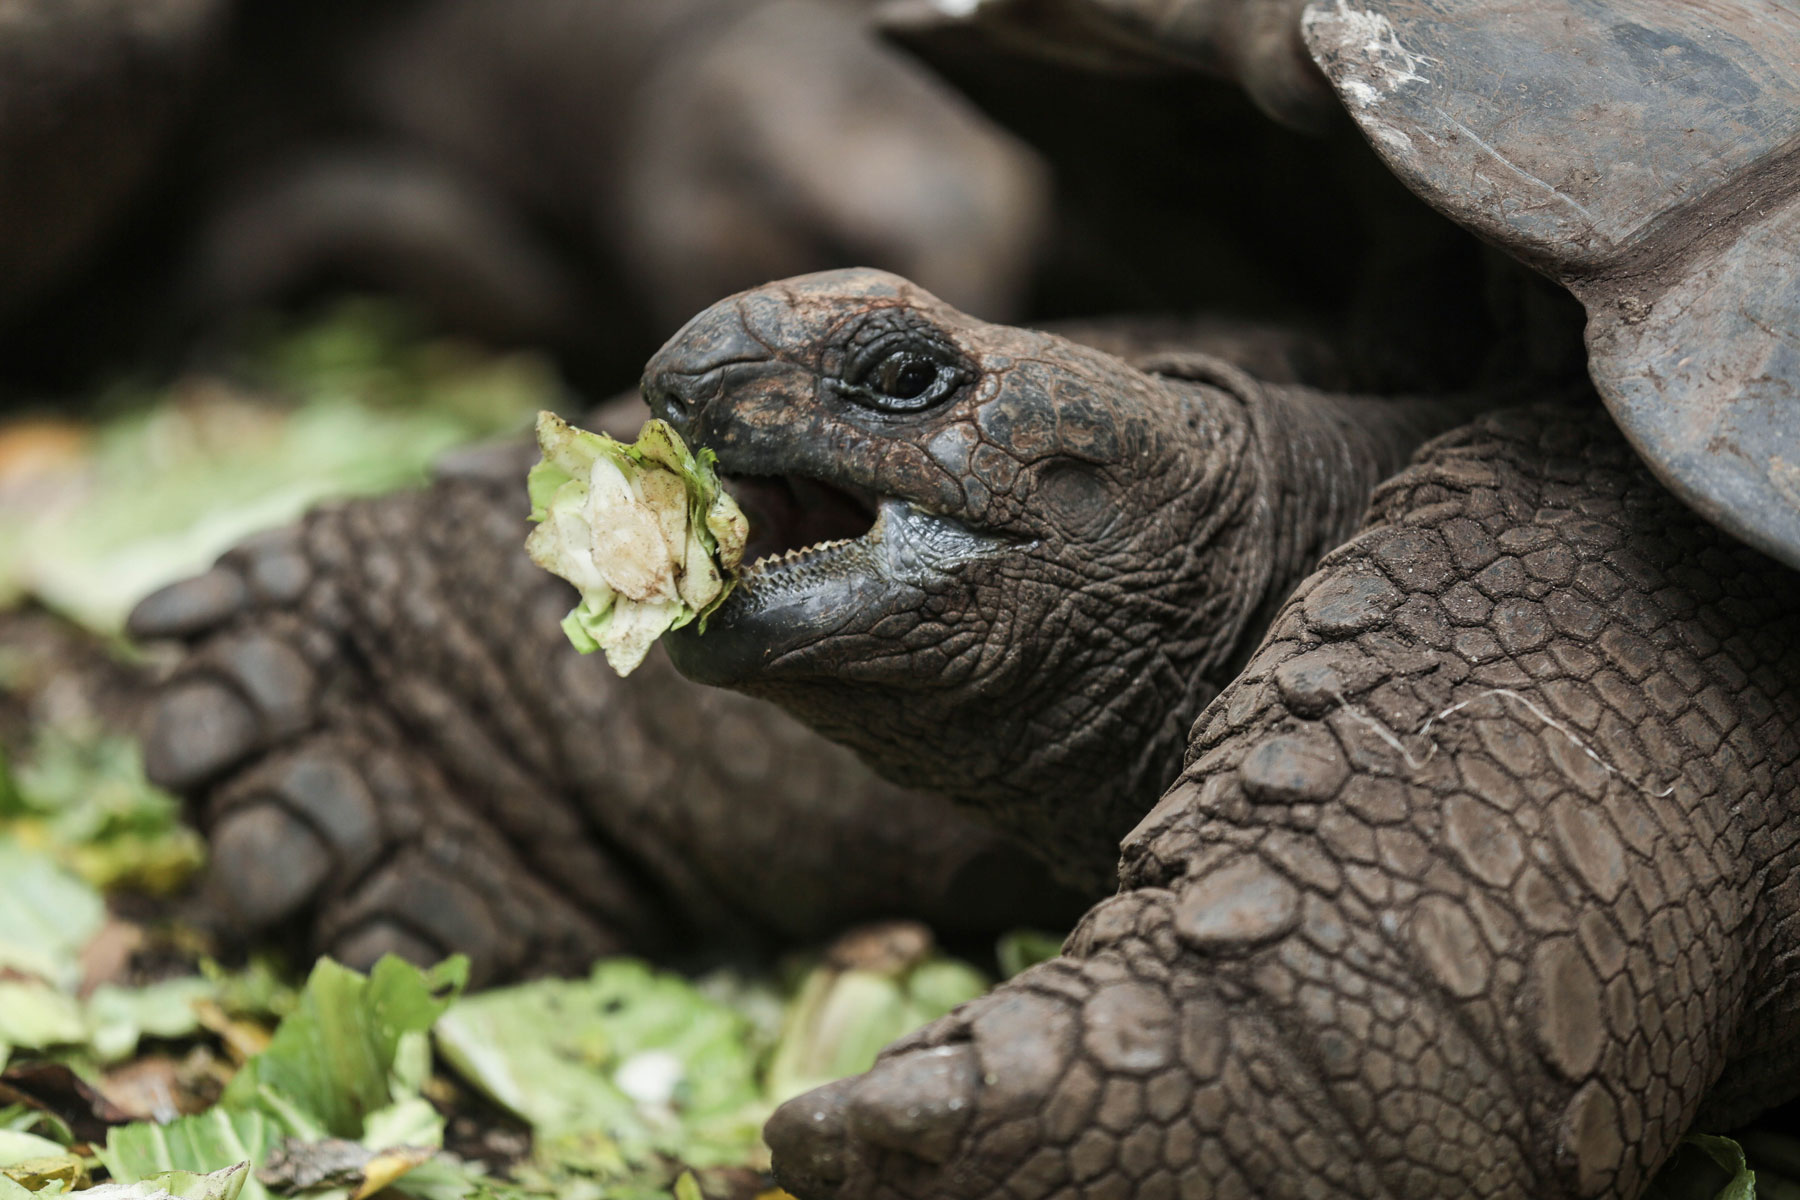 An Aldabra giant tortoise feeds on vegetables at a conservation compound on Changuu Island, northwest of Zanzibar, Tanzania, on Wednesday, Jan. 21, 2015. The endangered species, some of which live longer than 100 years old, continues to be brought to the island for protection from theft and better breeding. (AP Photo/Mosa'ab Elshamy)